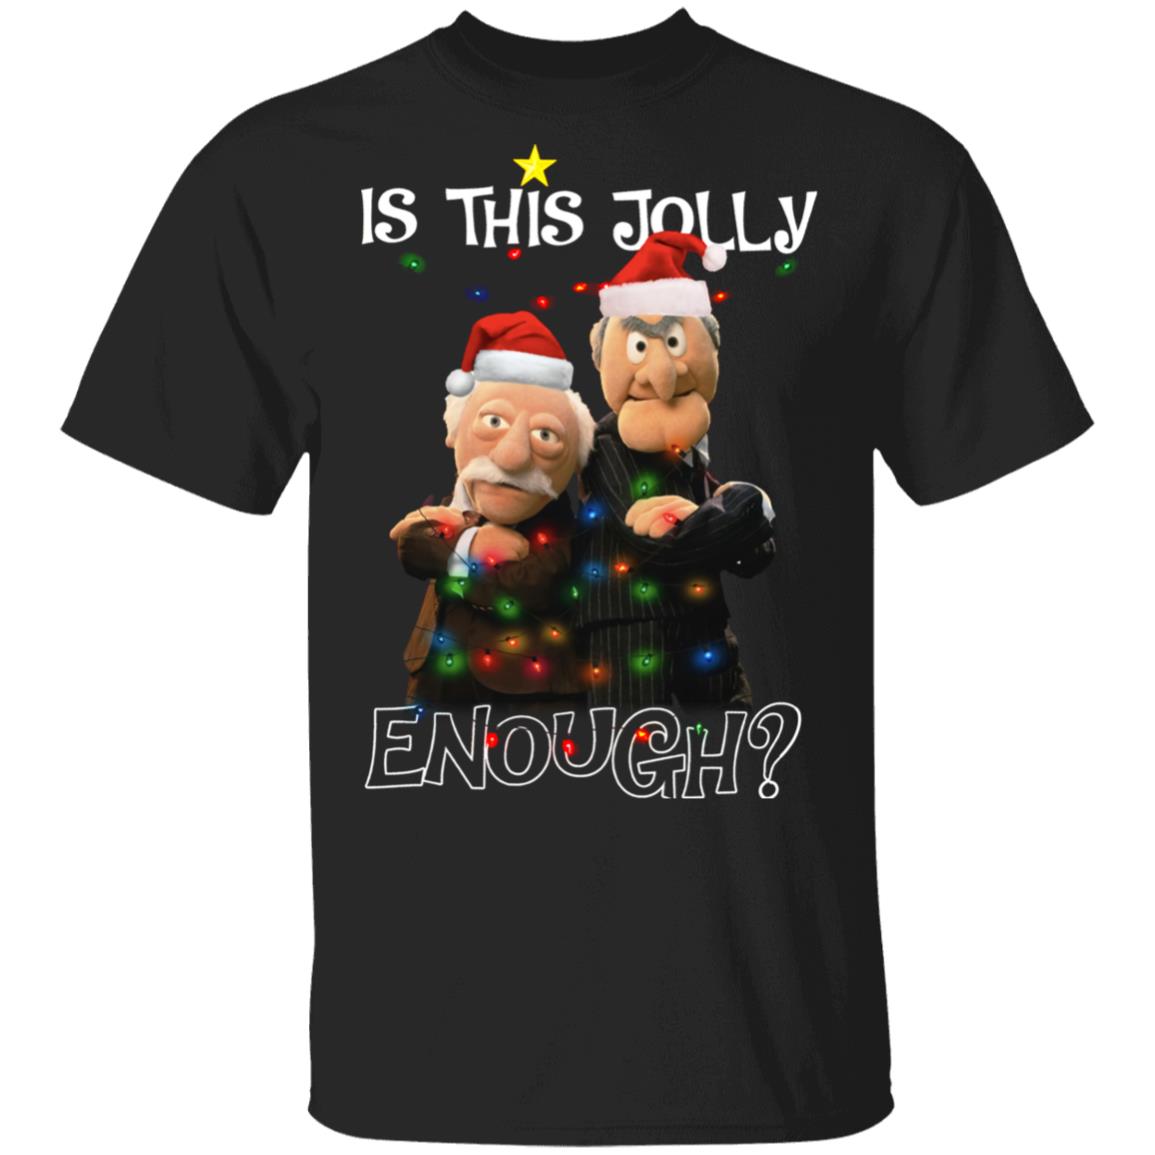 Statler And Waldorf Grumpy Is This Jolly Enough Christmas Unisex T-Shirt